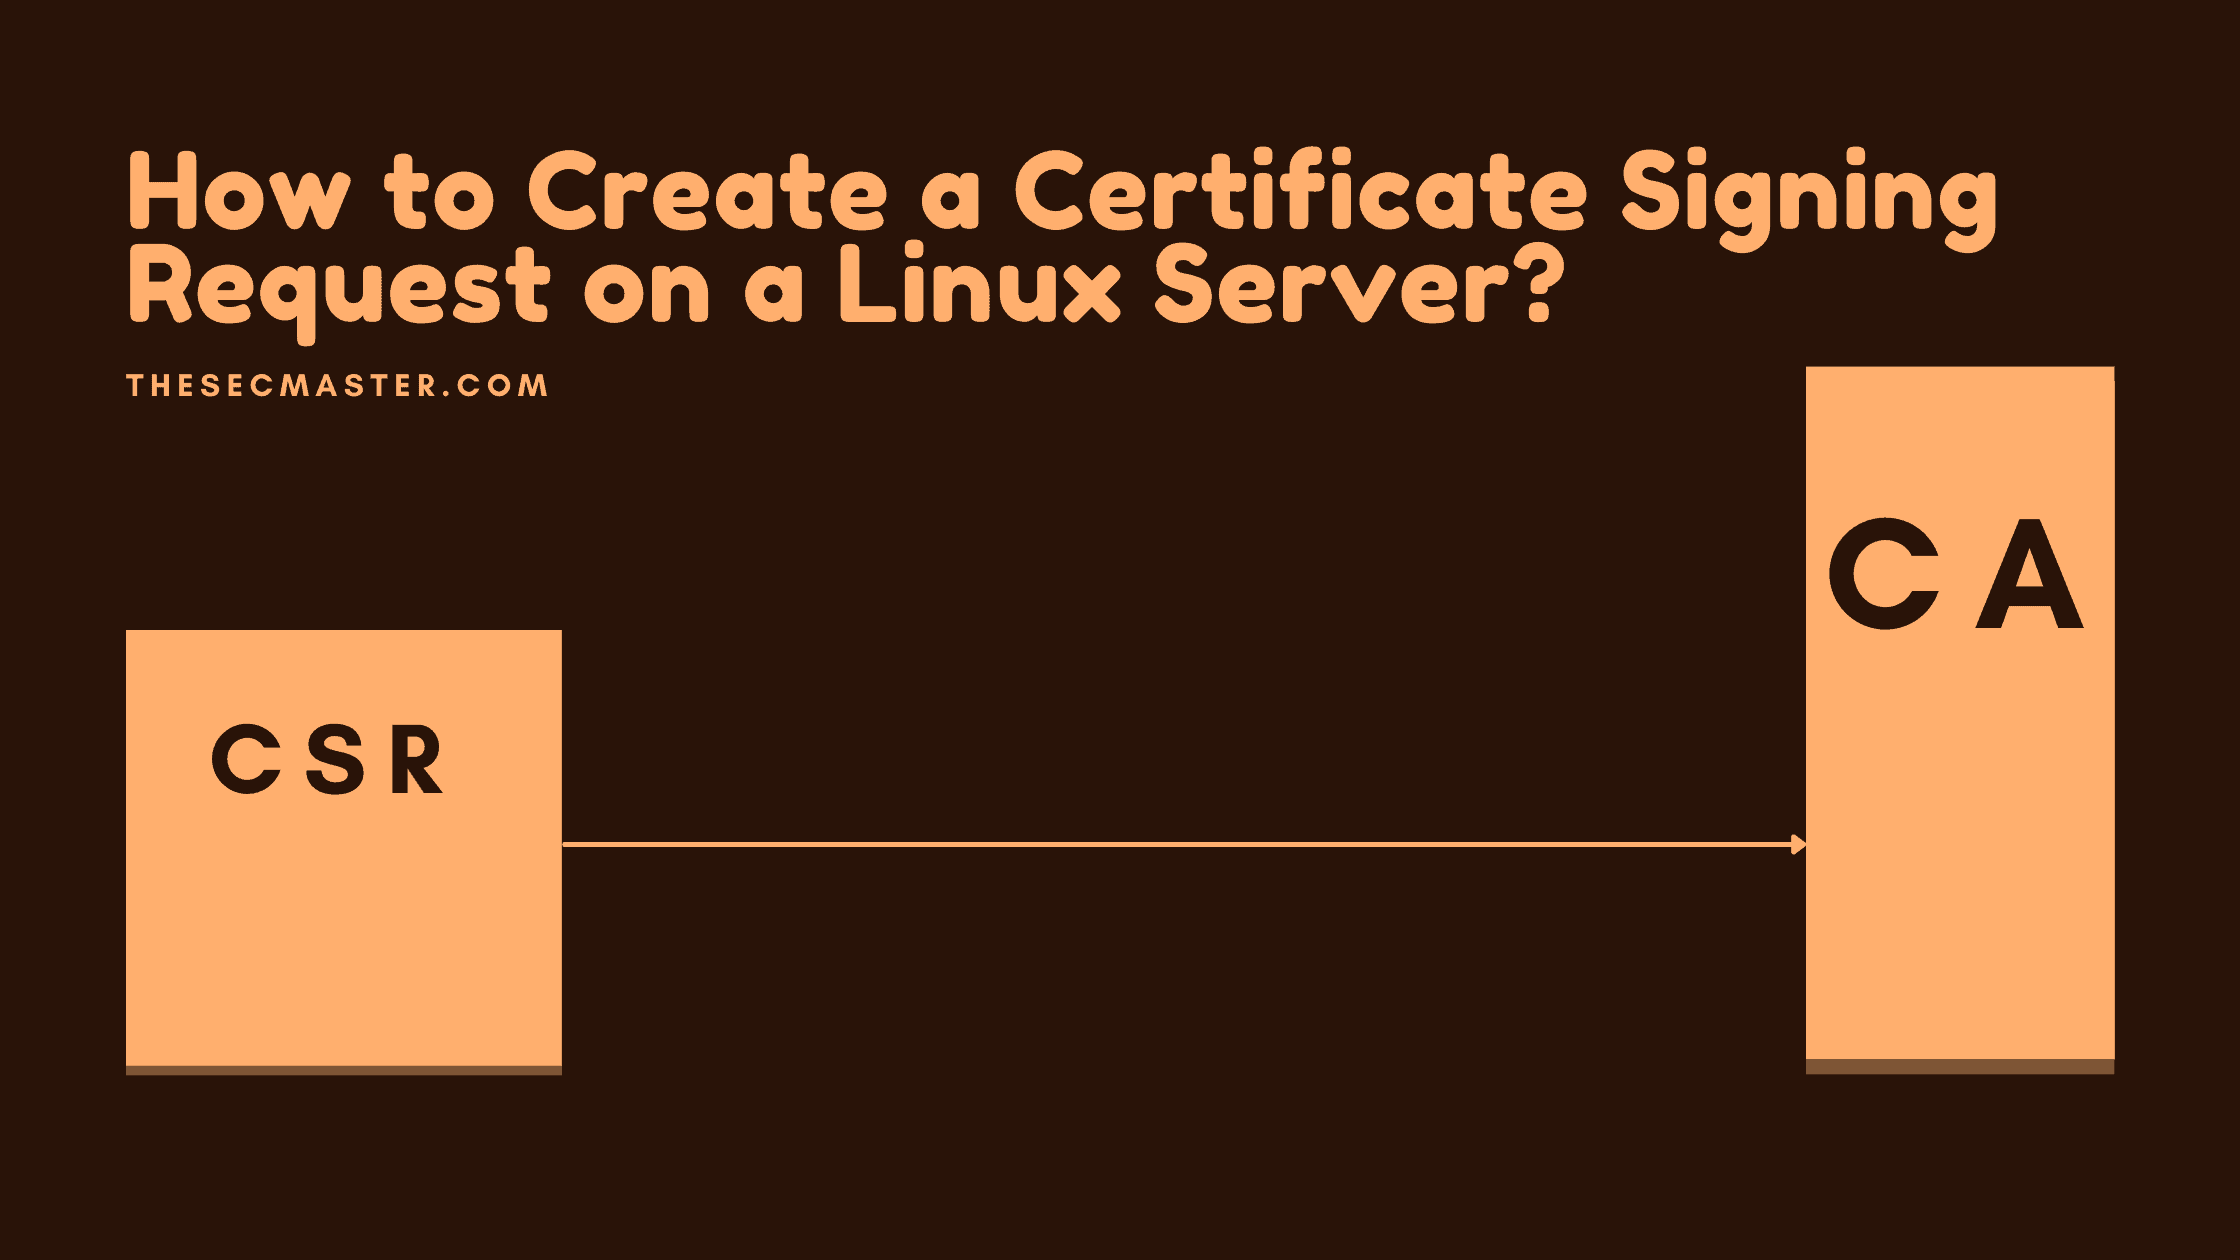 How To Create A Certificate Signing Request On A Linux Server